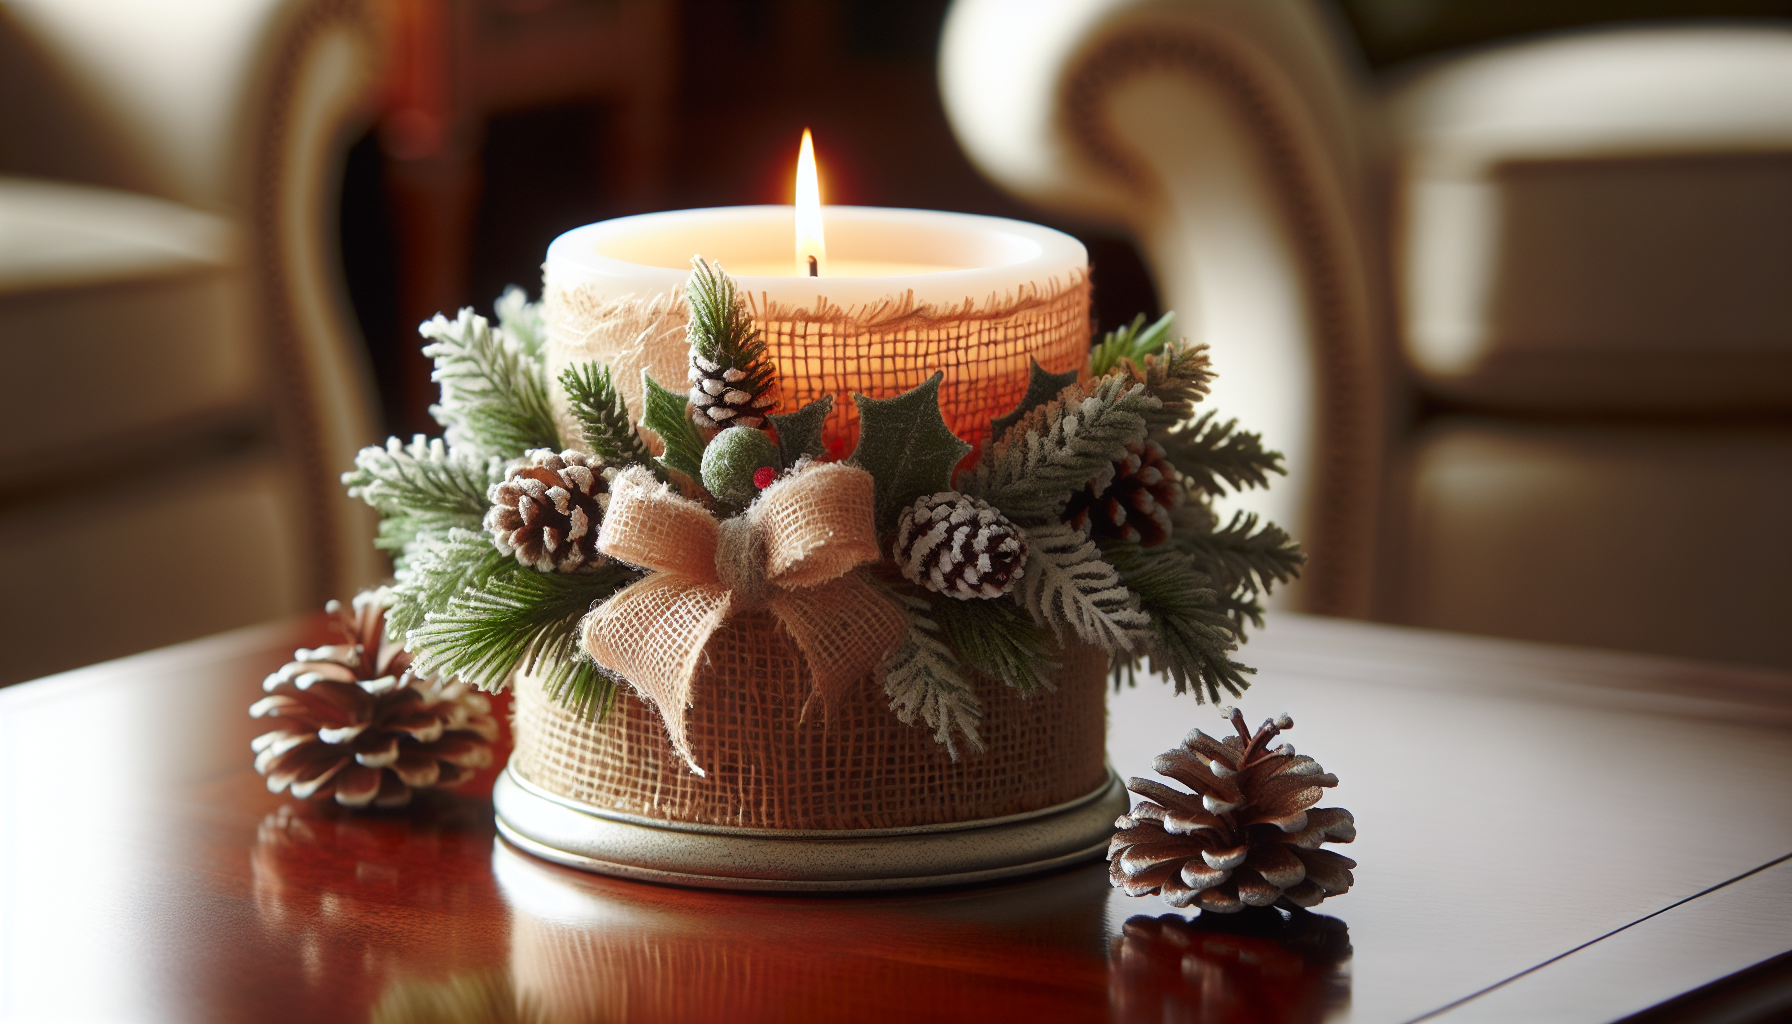 Festive pine-scented candle